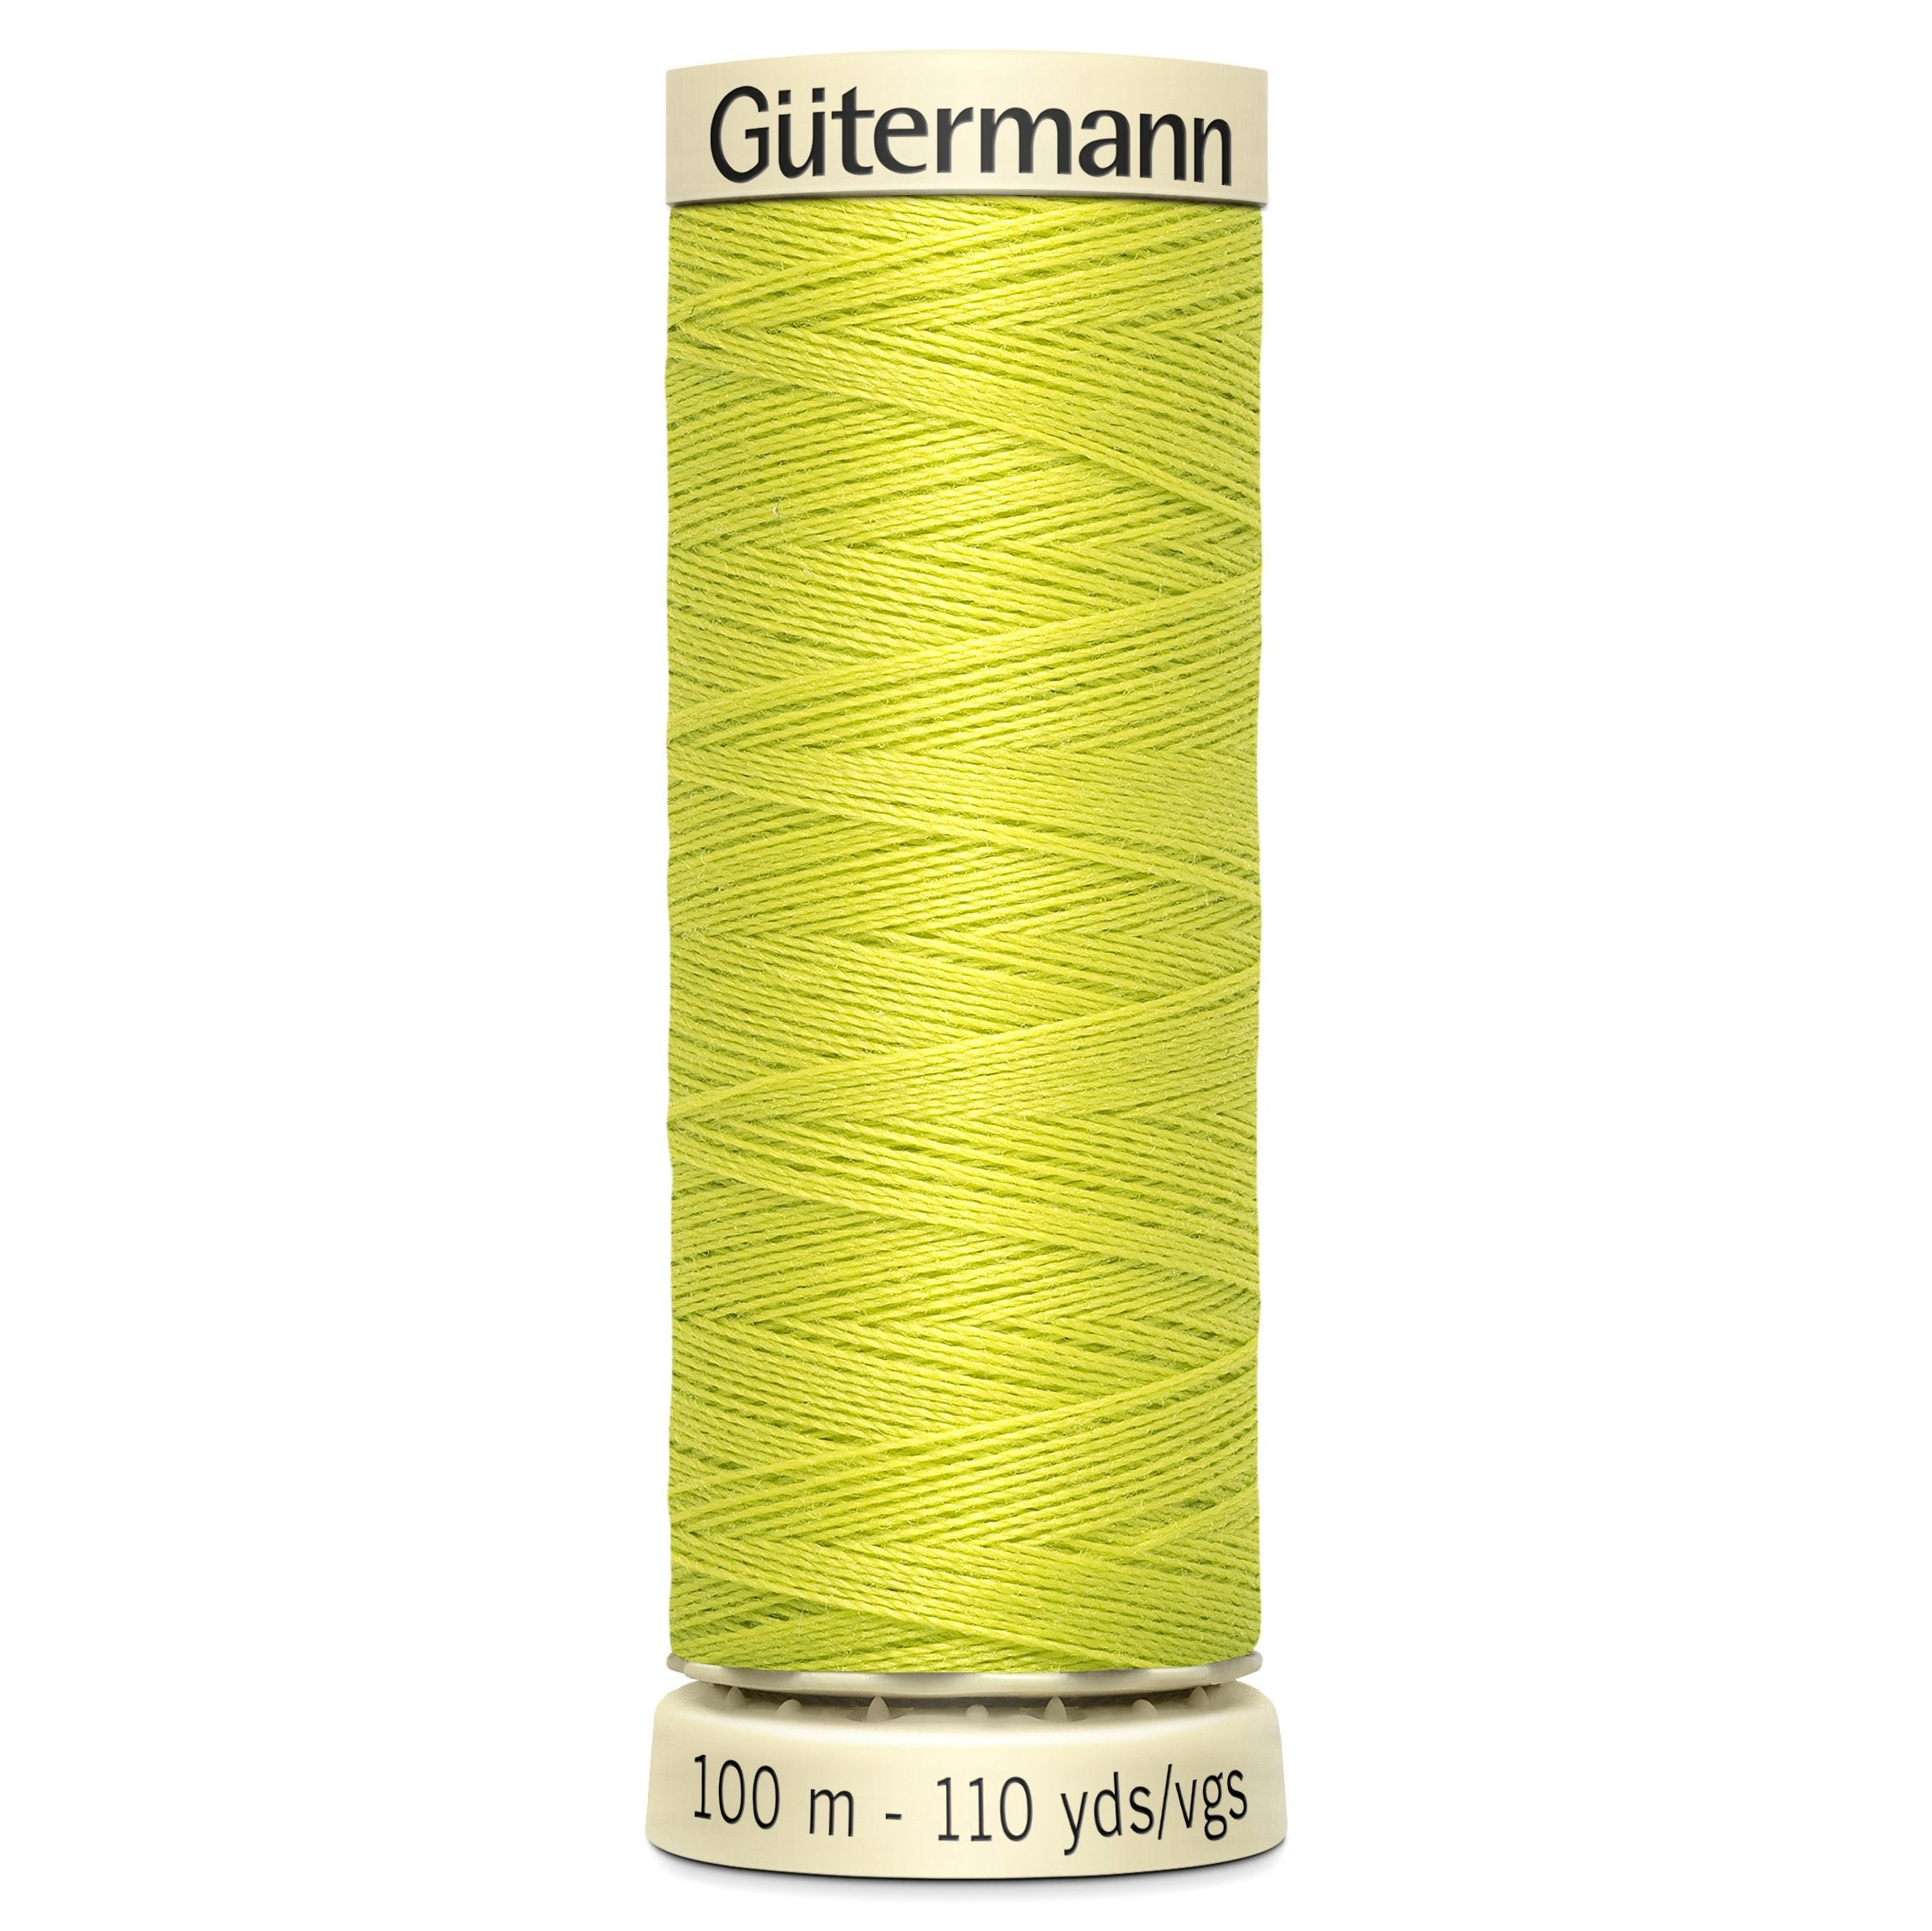 Gutermann Sew All Thread colour 334 Light Green from Jaycotts Sewing Supplies